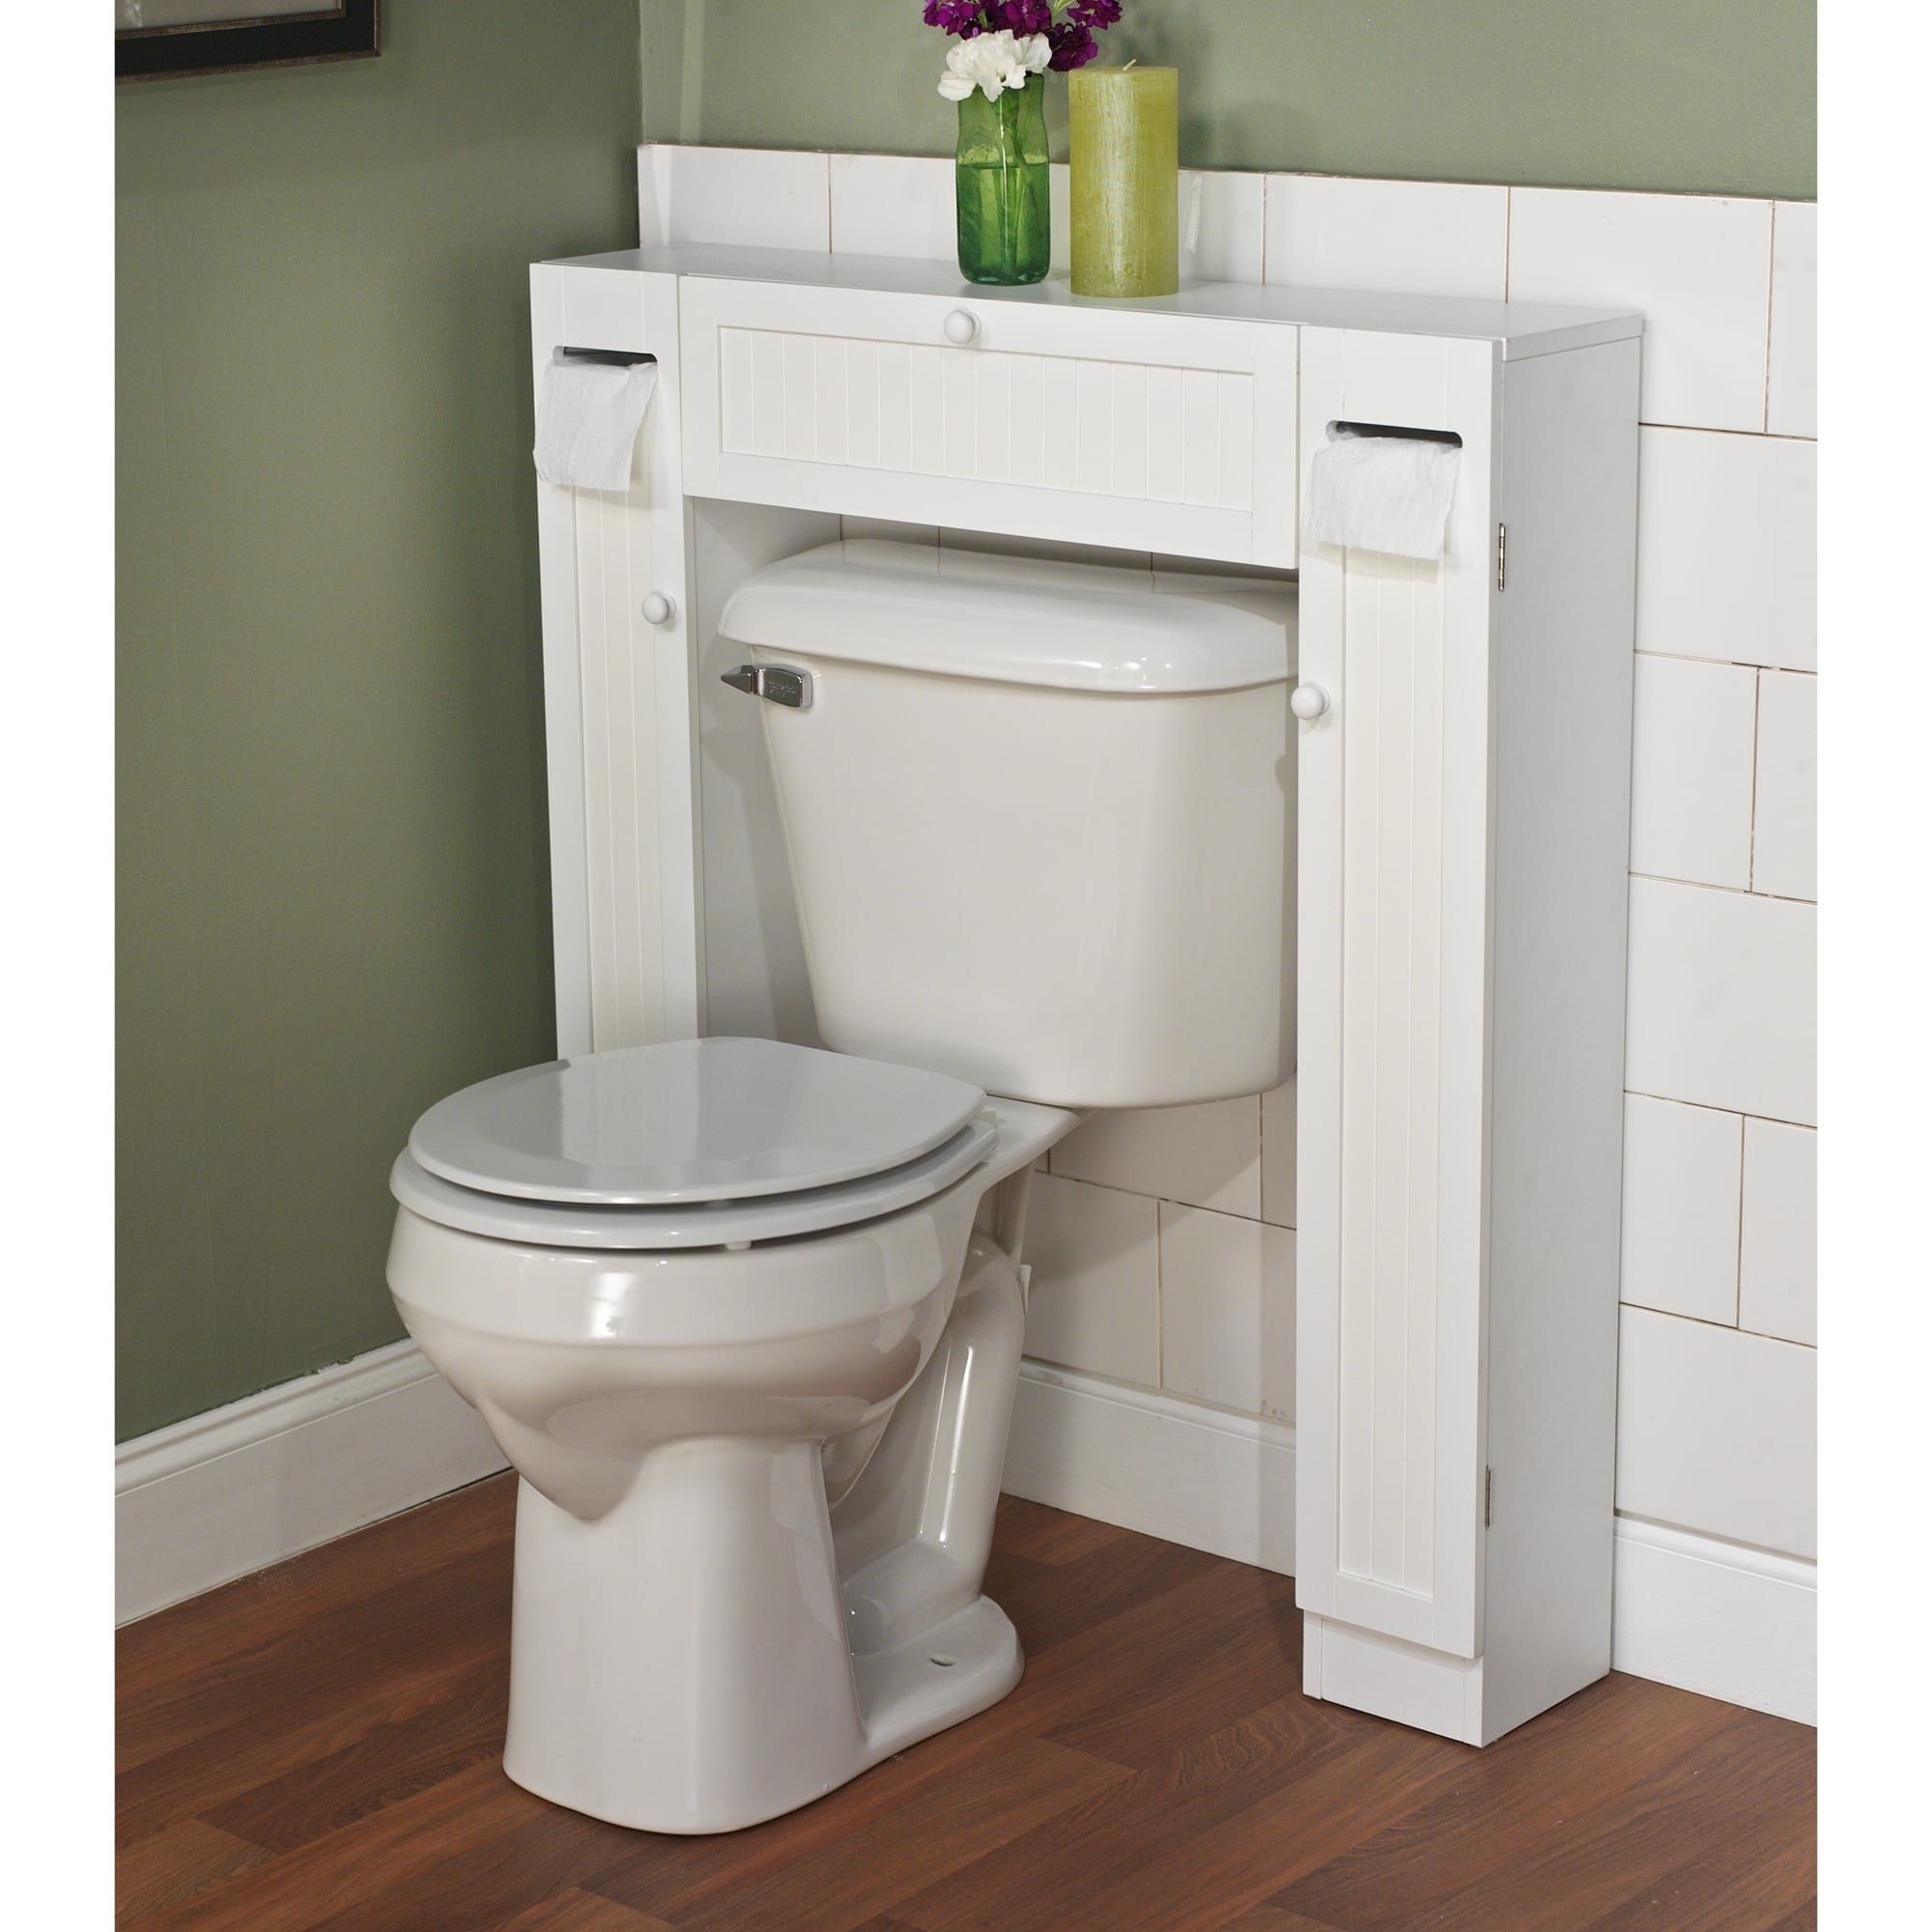 34" x 38.5" Over the Toilet Cabinet